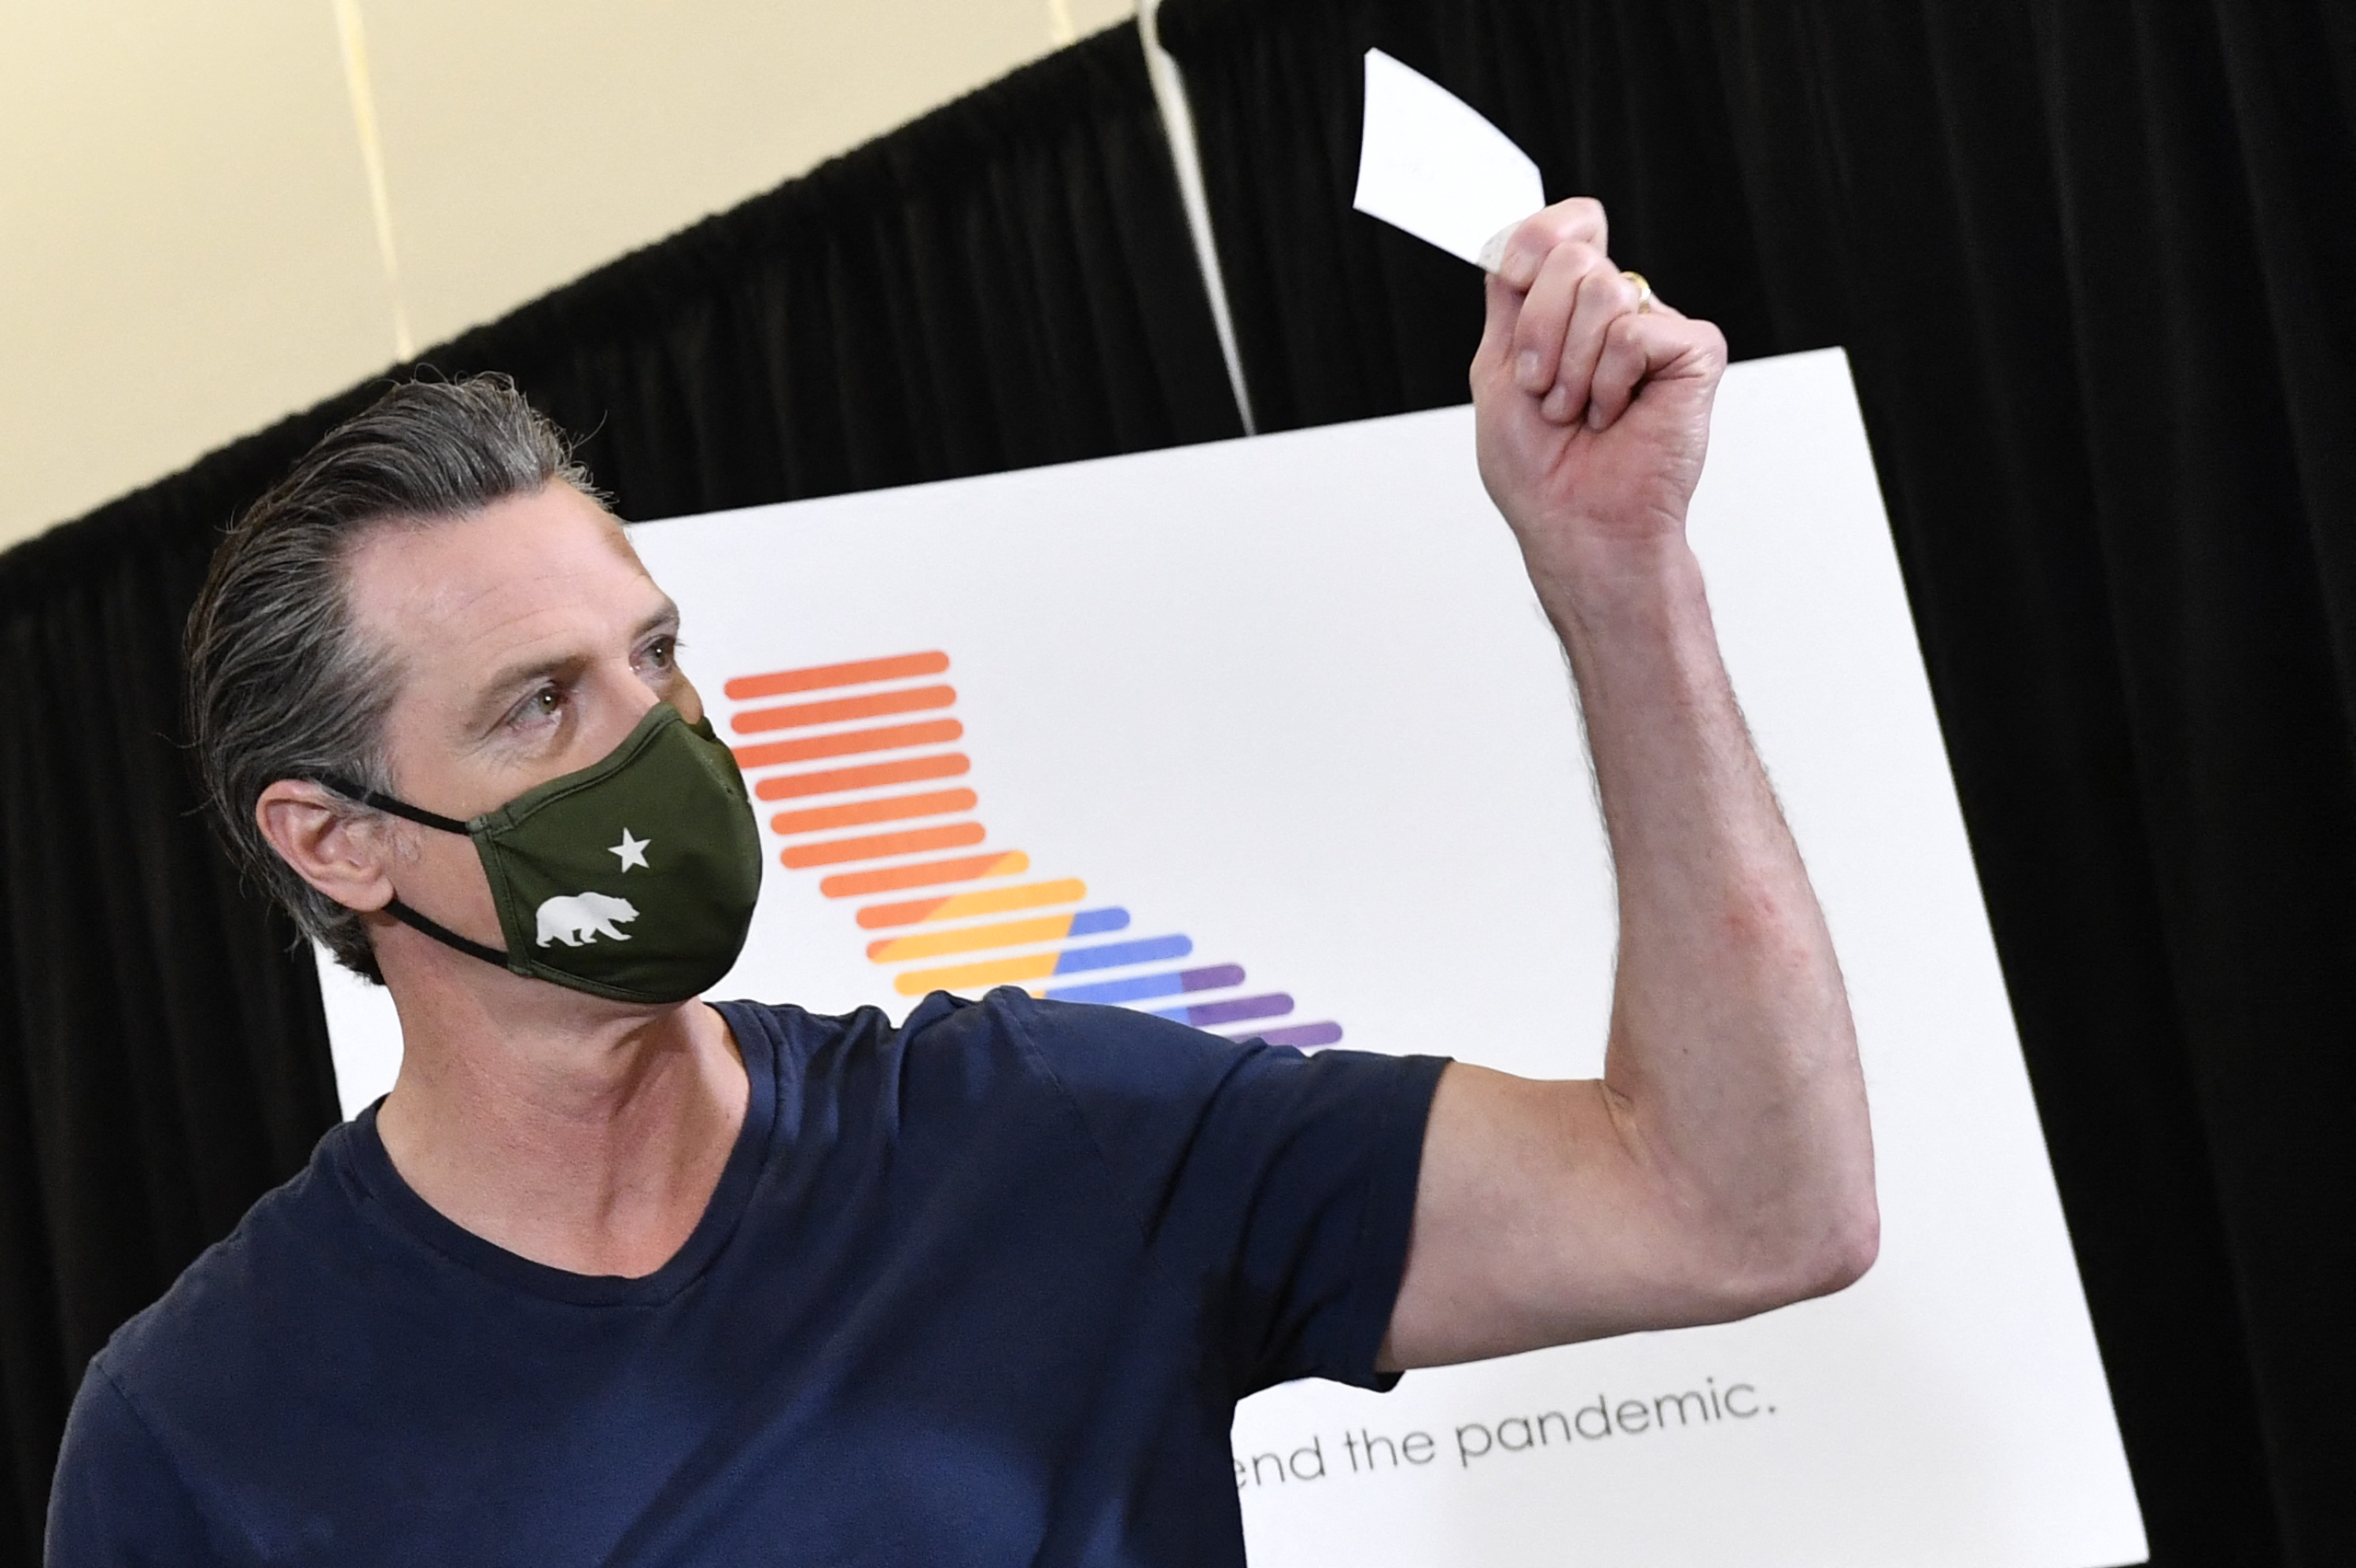 California Governor Gavin Newsom D-CA holds up his card after receiving his dose of the Johnson & Johnson Janssen Covid-19 vaccine in Los Angeles, California on April 1, 2021. - California will make all adults eligible for Covid-19 vaccines from April 15,2021 Governor Gavin Newsom said Thursday, as supply restrictions ease in the most populous US state. (Photo by Patrick T. FALLON / AFP) (Photo by PATRICK T. FALLON/AFP via Getty Images)